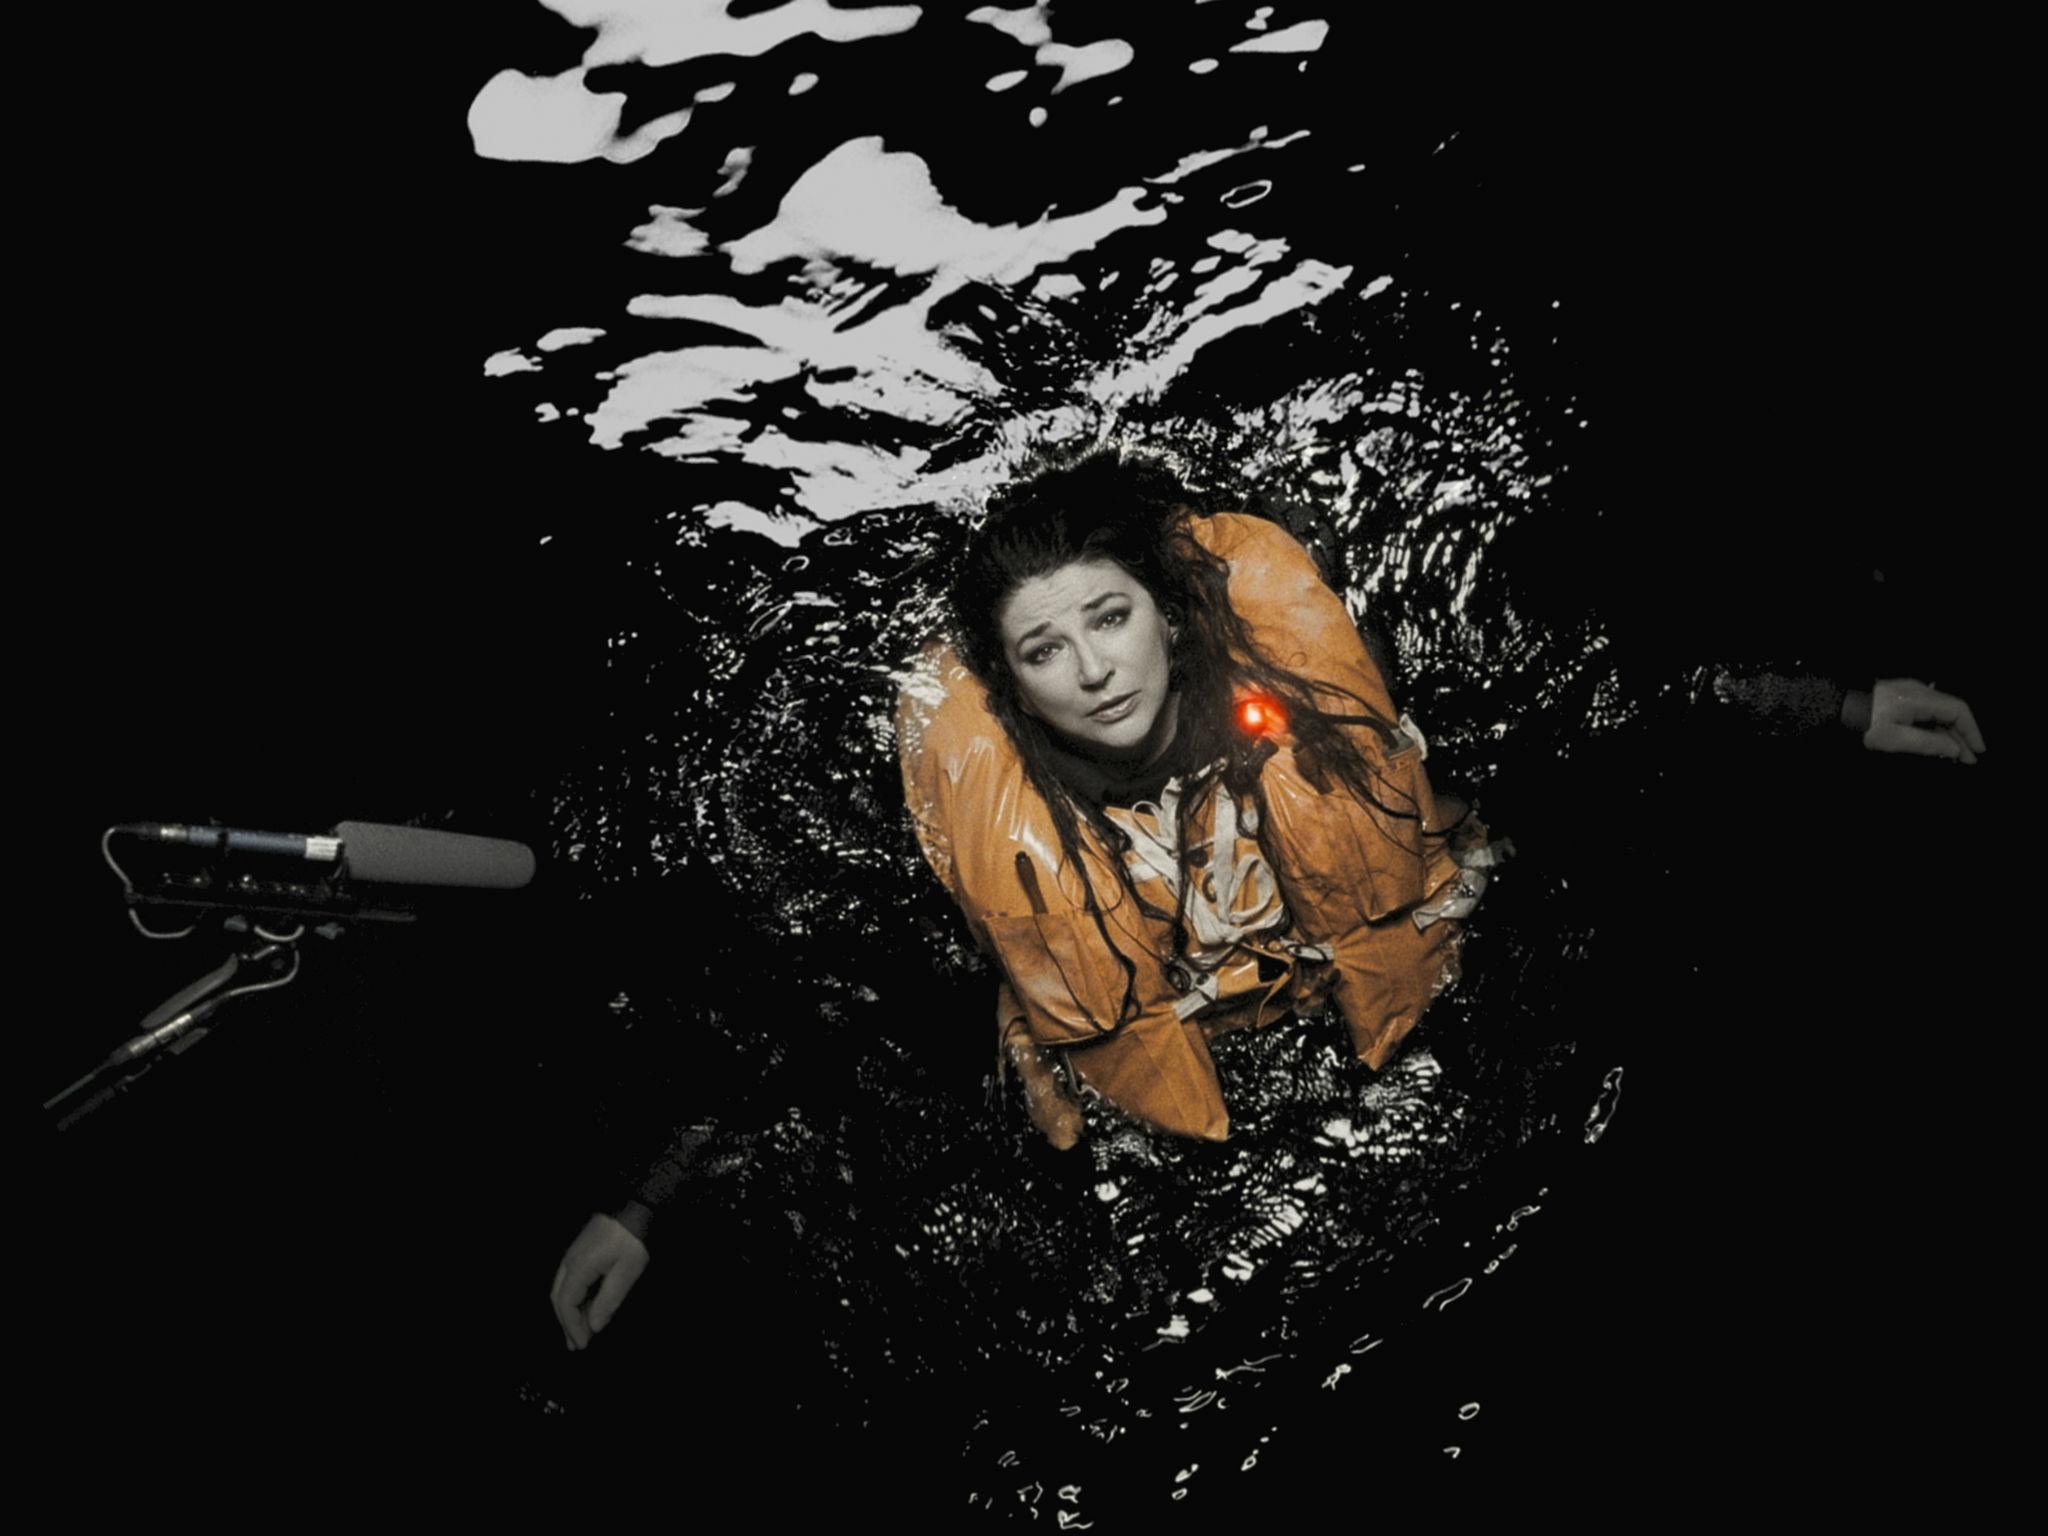  Kate Bush was suspended for six hours in a tank of water at Pinewood Studios filming visuals for ‘And Dream of Sheep’ on ‘The Ninth Wave’